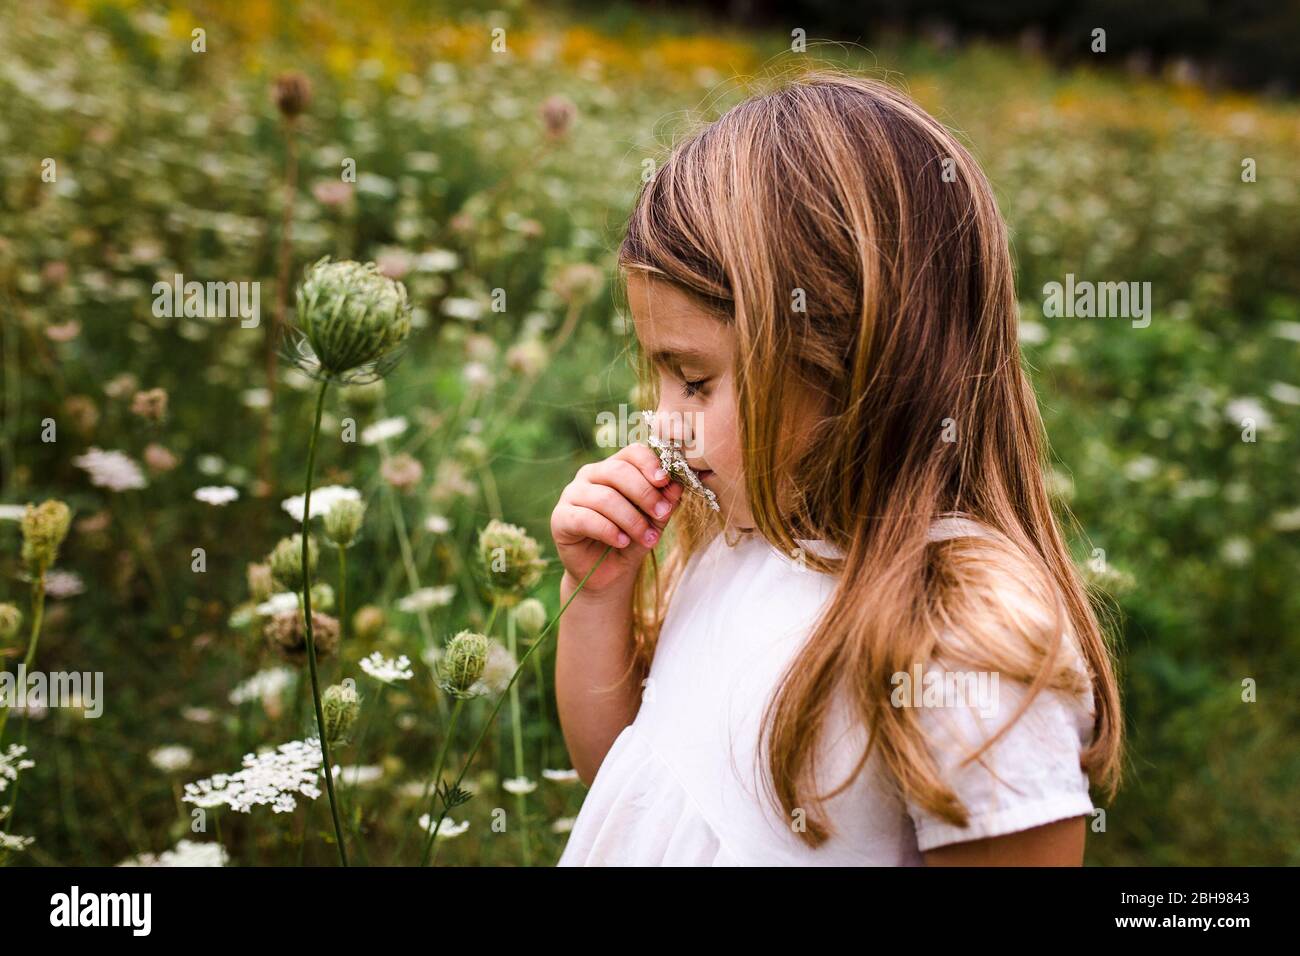 Girl Smelling Flowers in Field Stock Photo